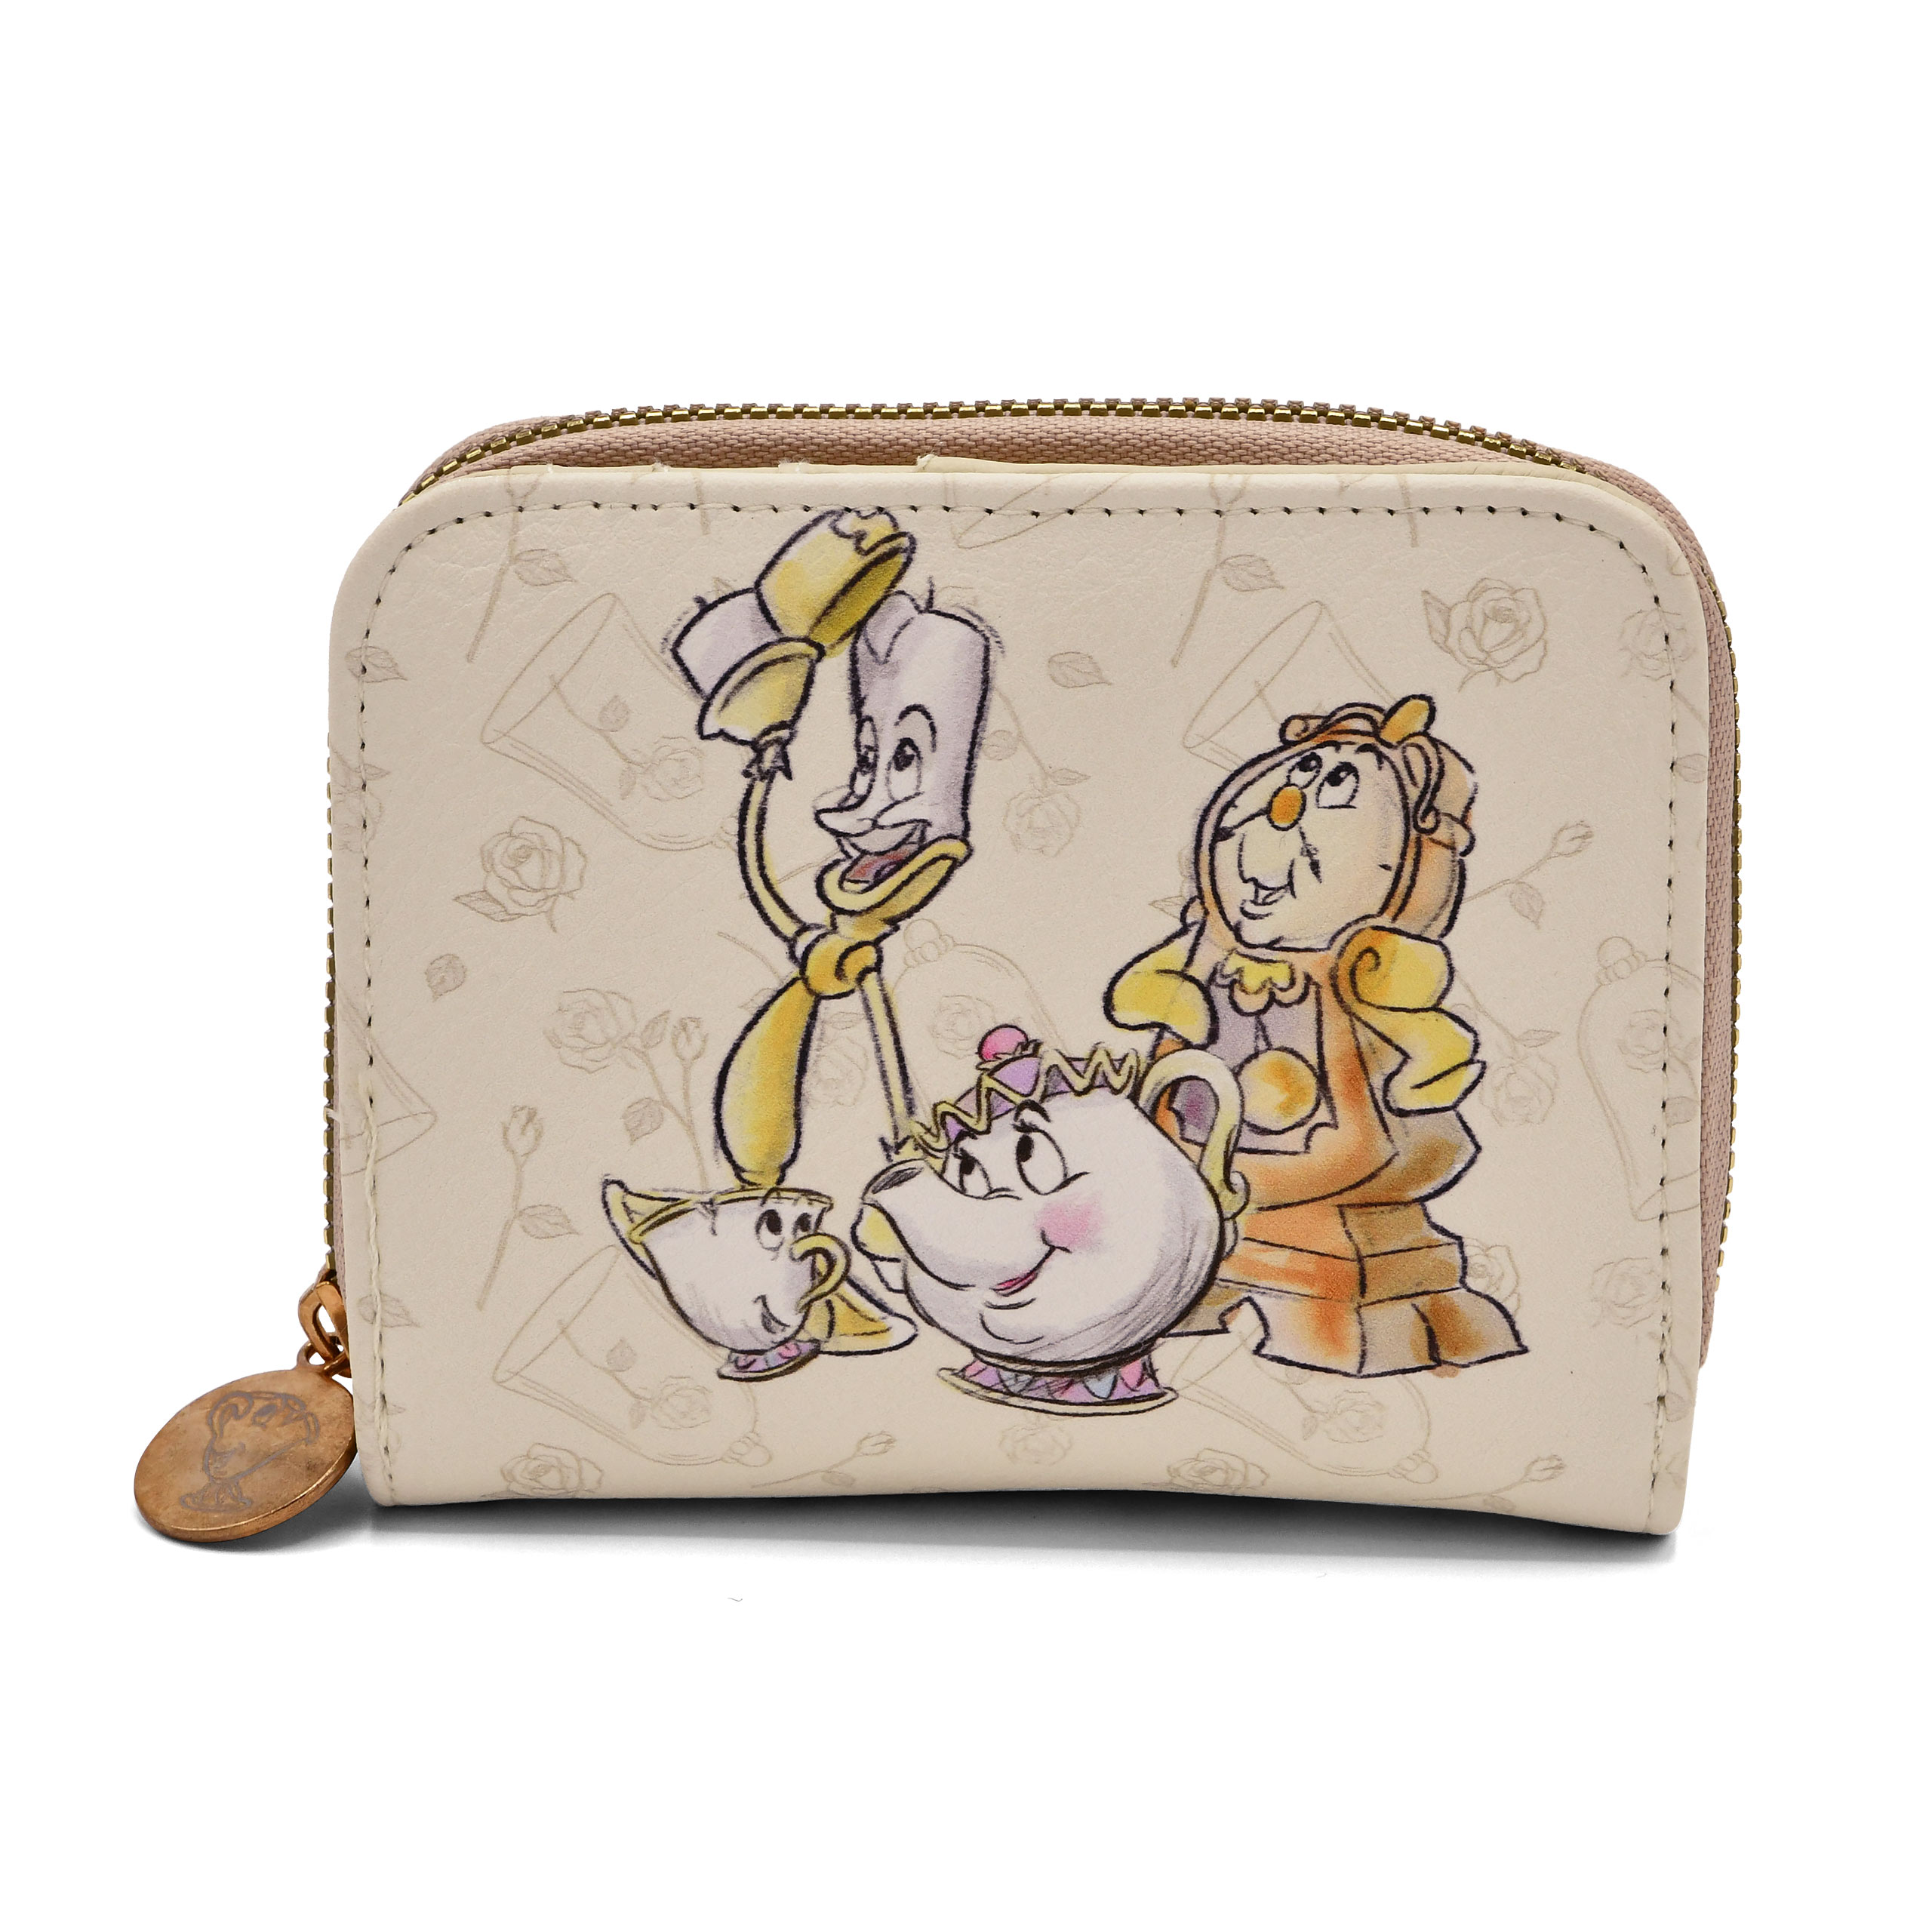 Beauty and the Beast - Mrs Potts, Chip, Lumiere, Cogsworth Wallet